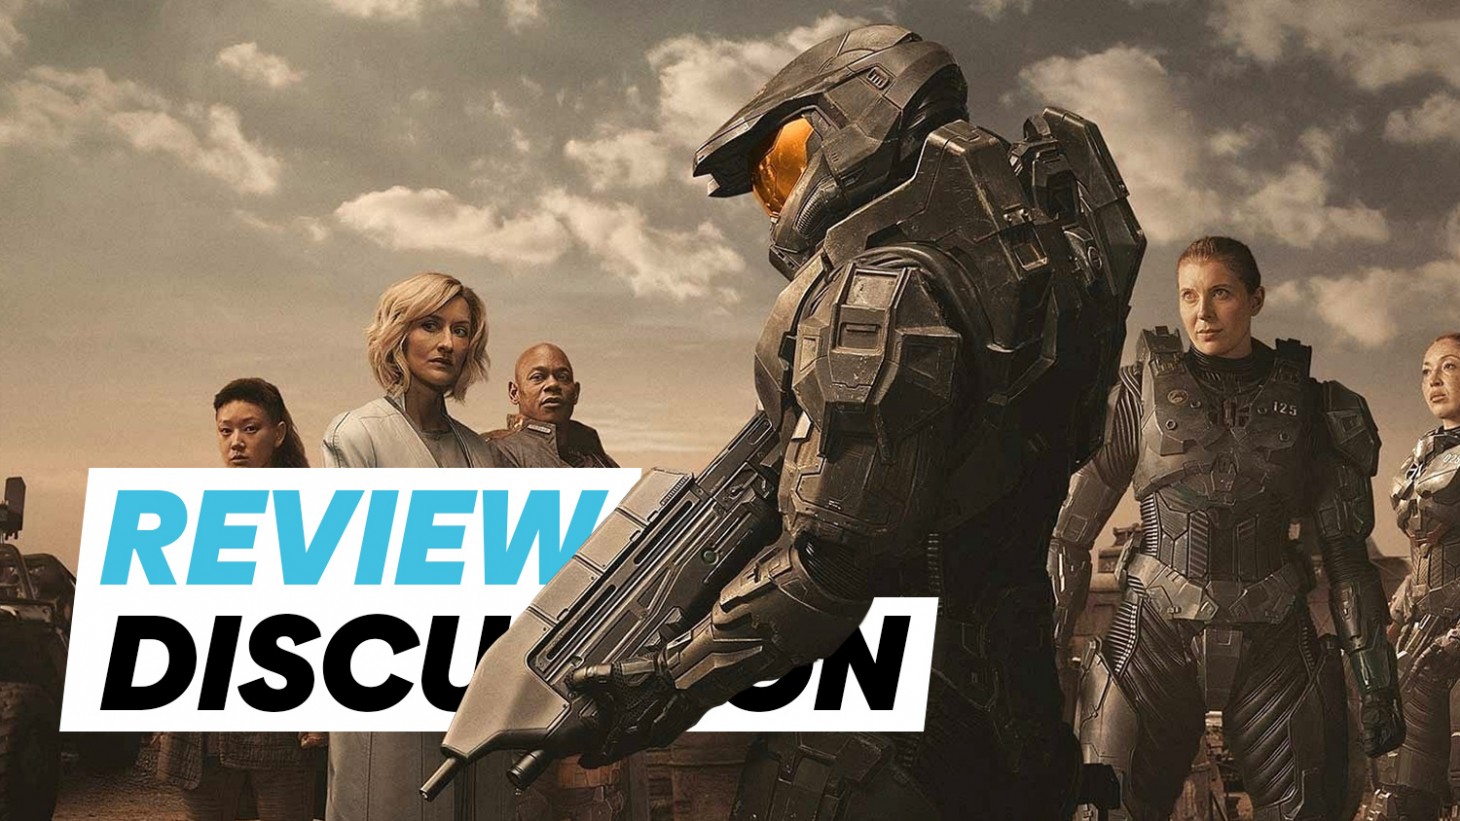 How Many Episodes Are There in 'Halo' and When Will It Release?